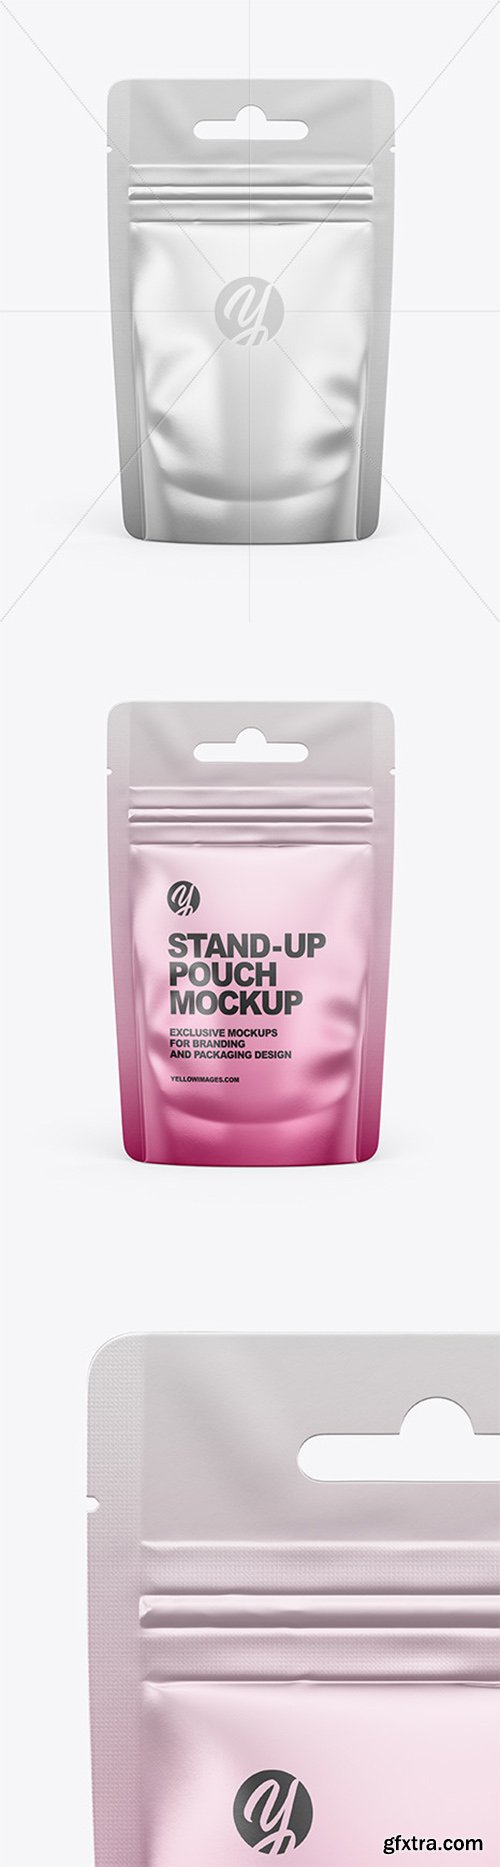 Metallic Stand-Up Pouch Mockup 66540